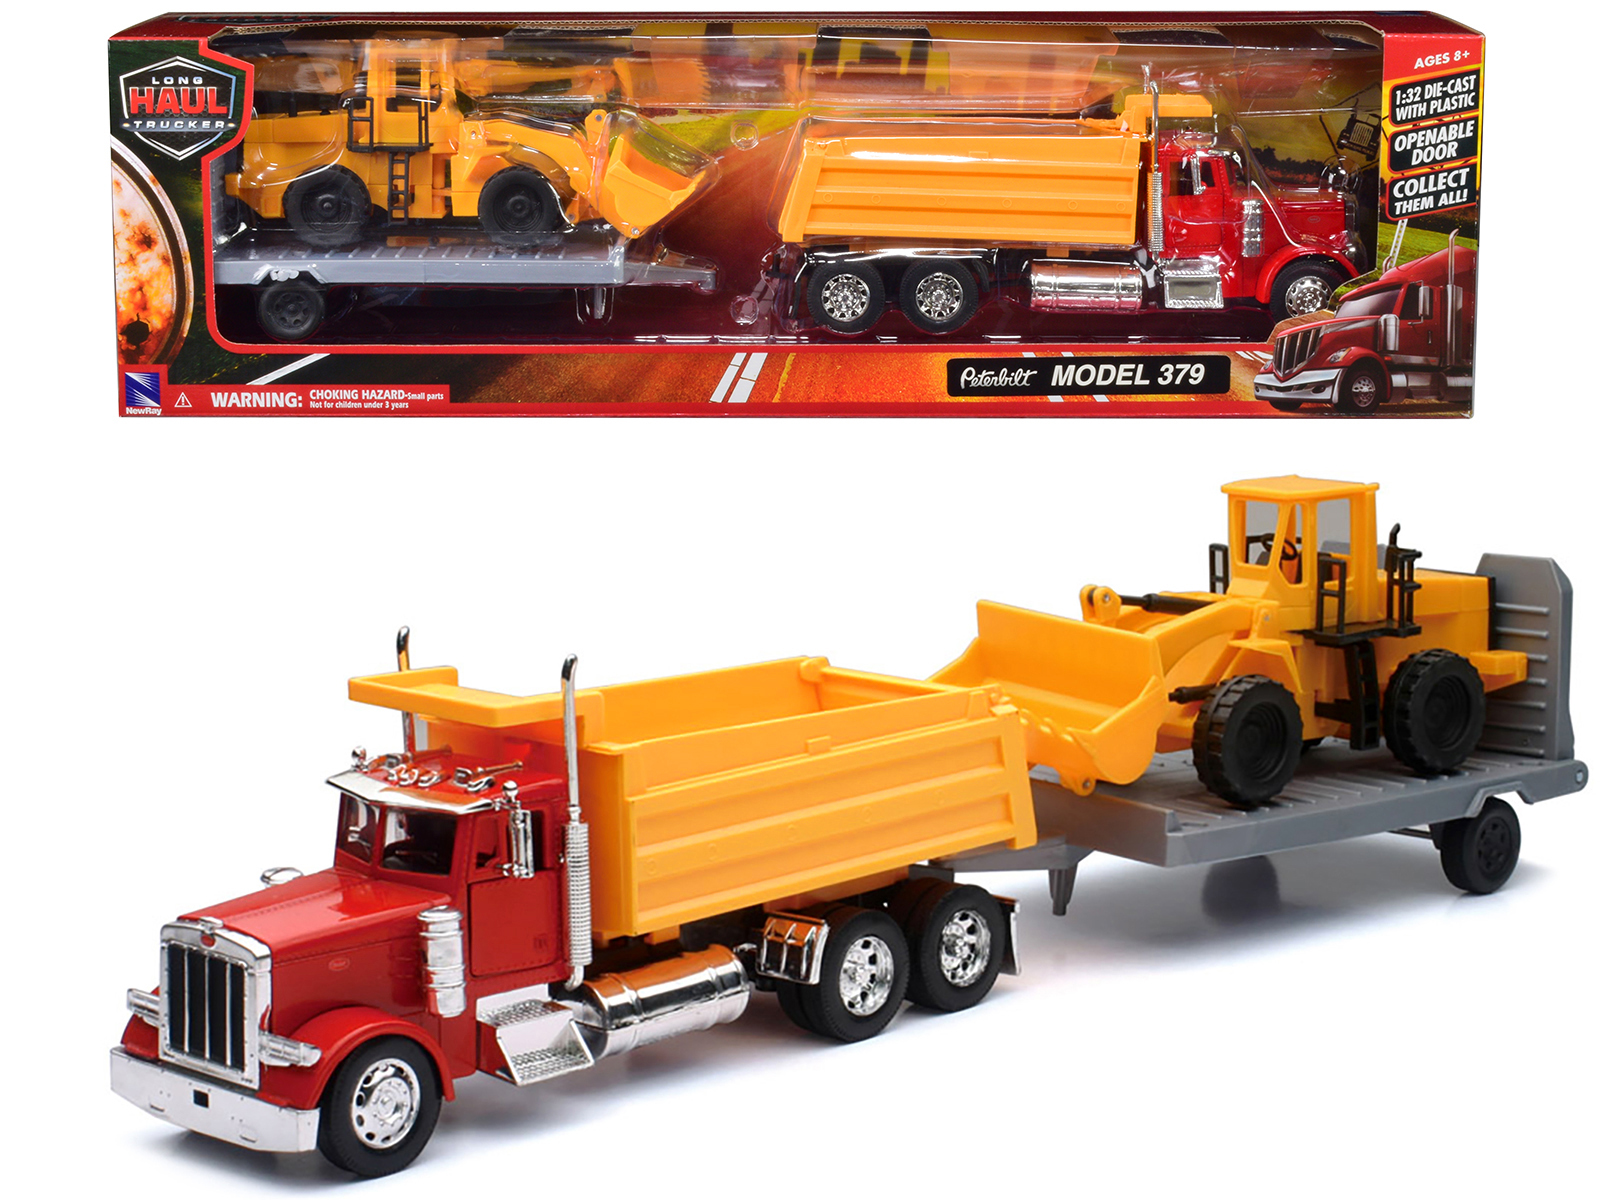 Peterbilt 379 Dump Truck Red and Wheel Loader Yellow with Flatbed Trailer "Long  - $72.21